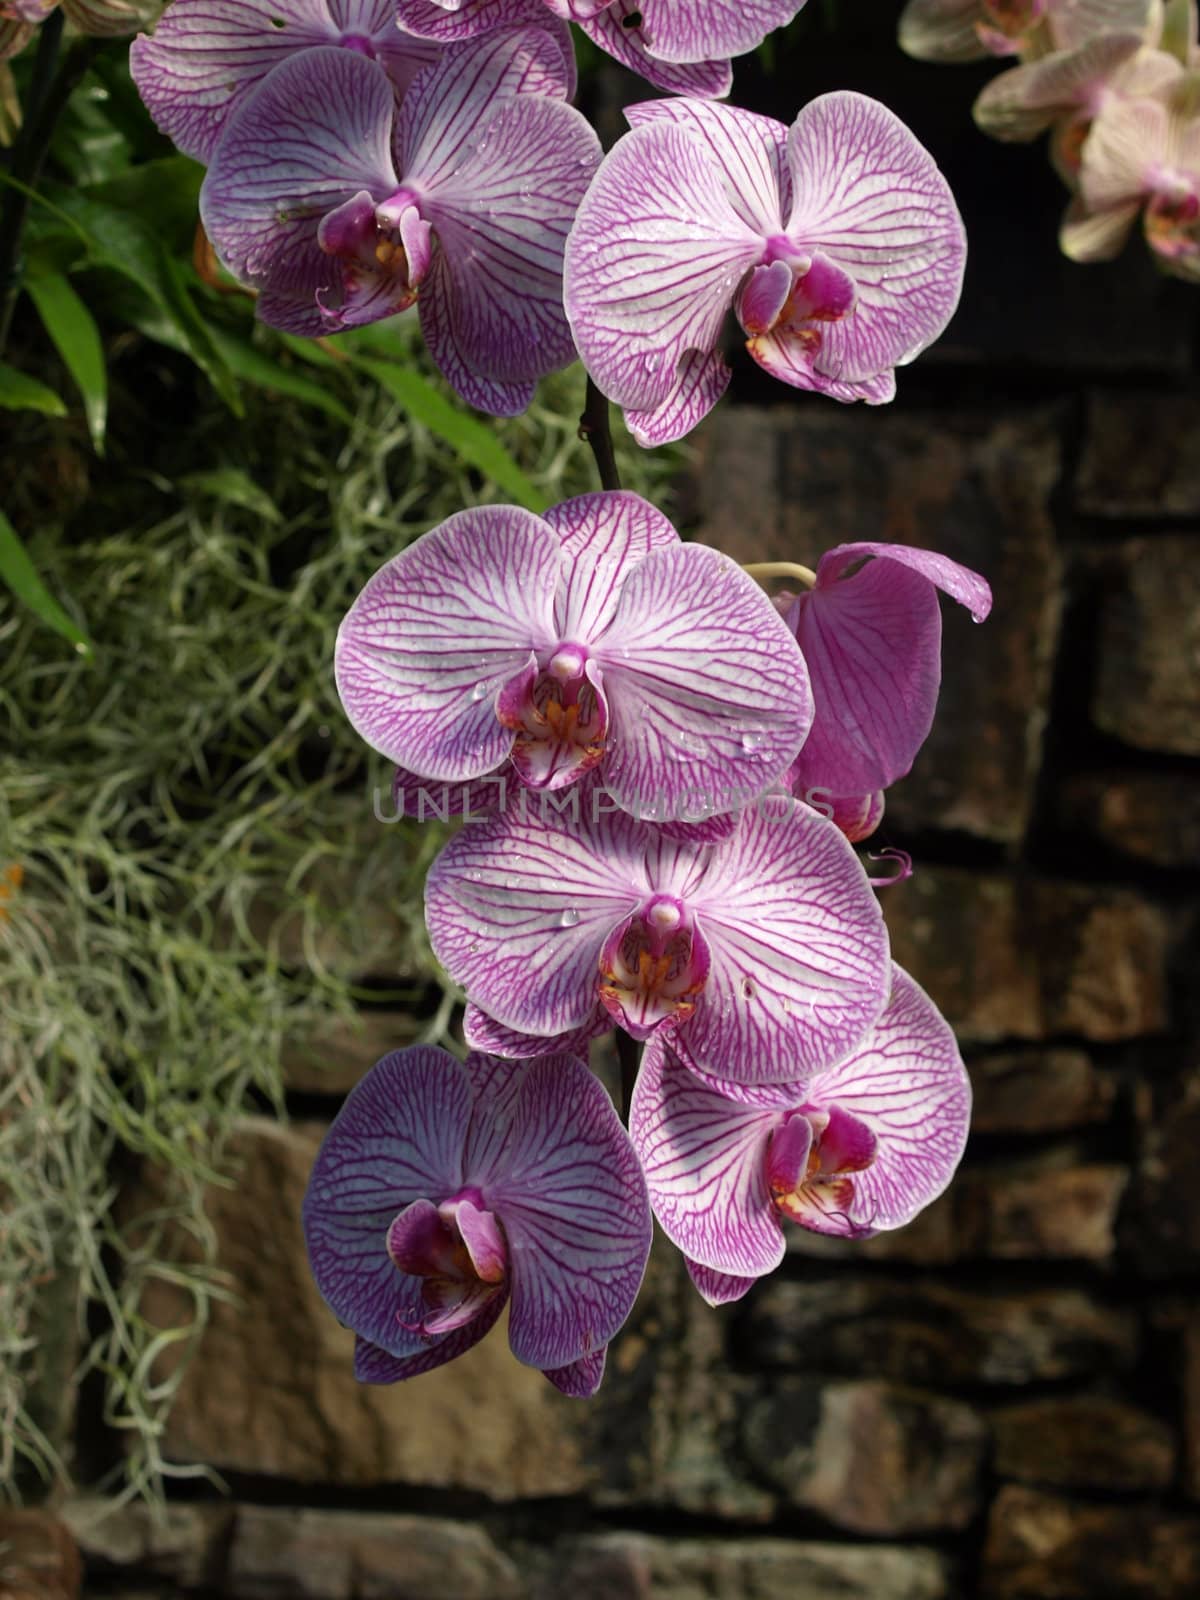 purple striped orchids in a garden setting